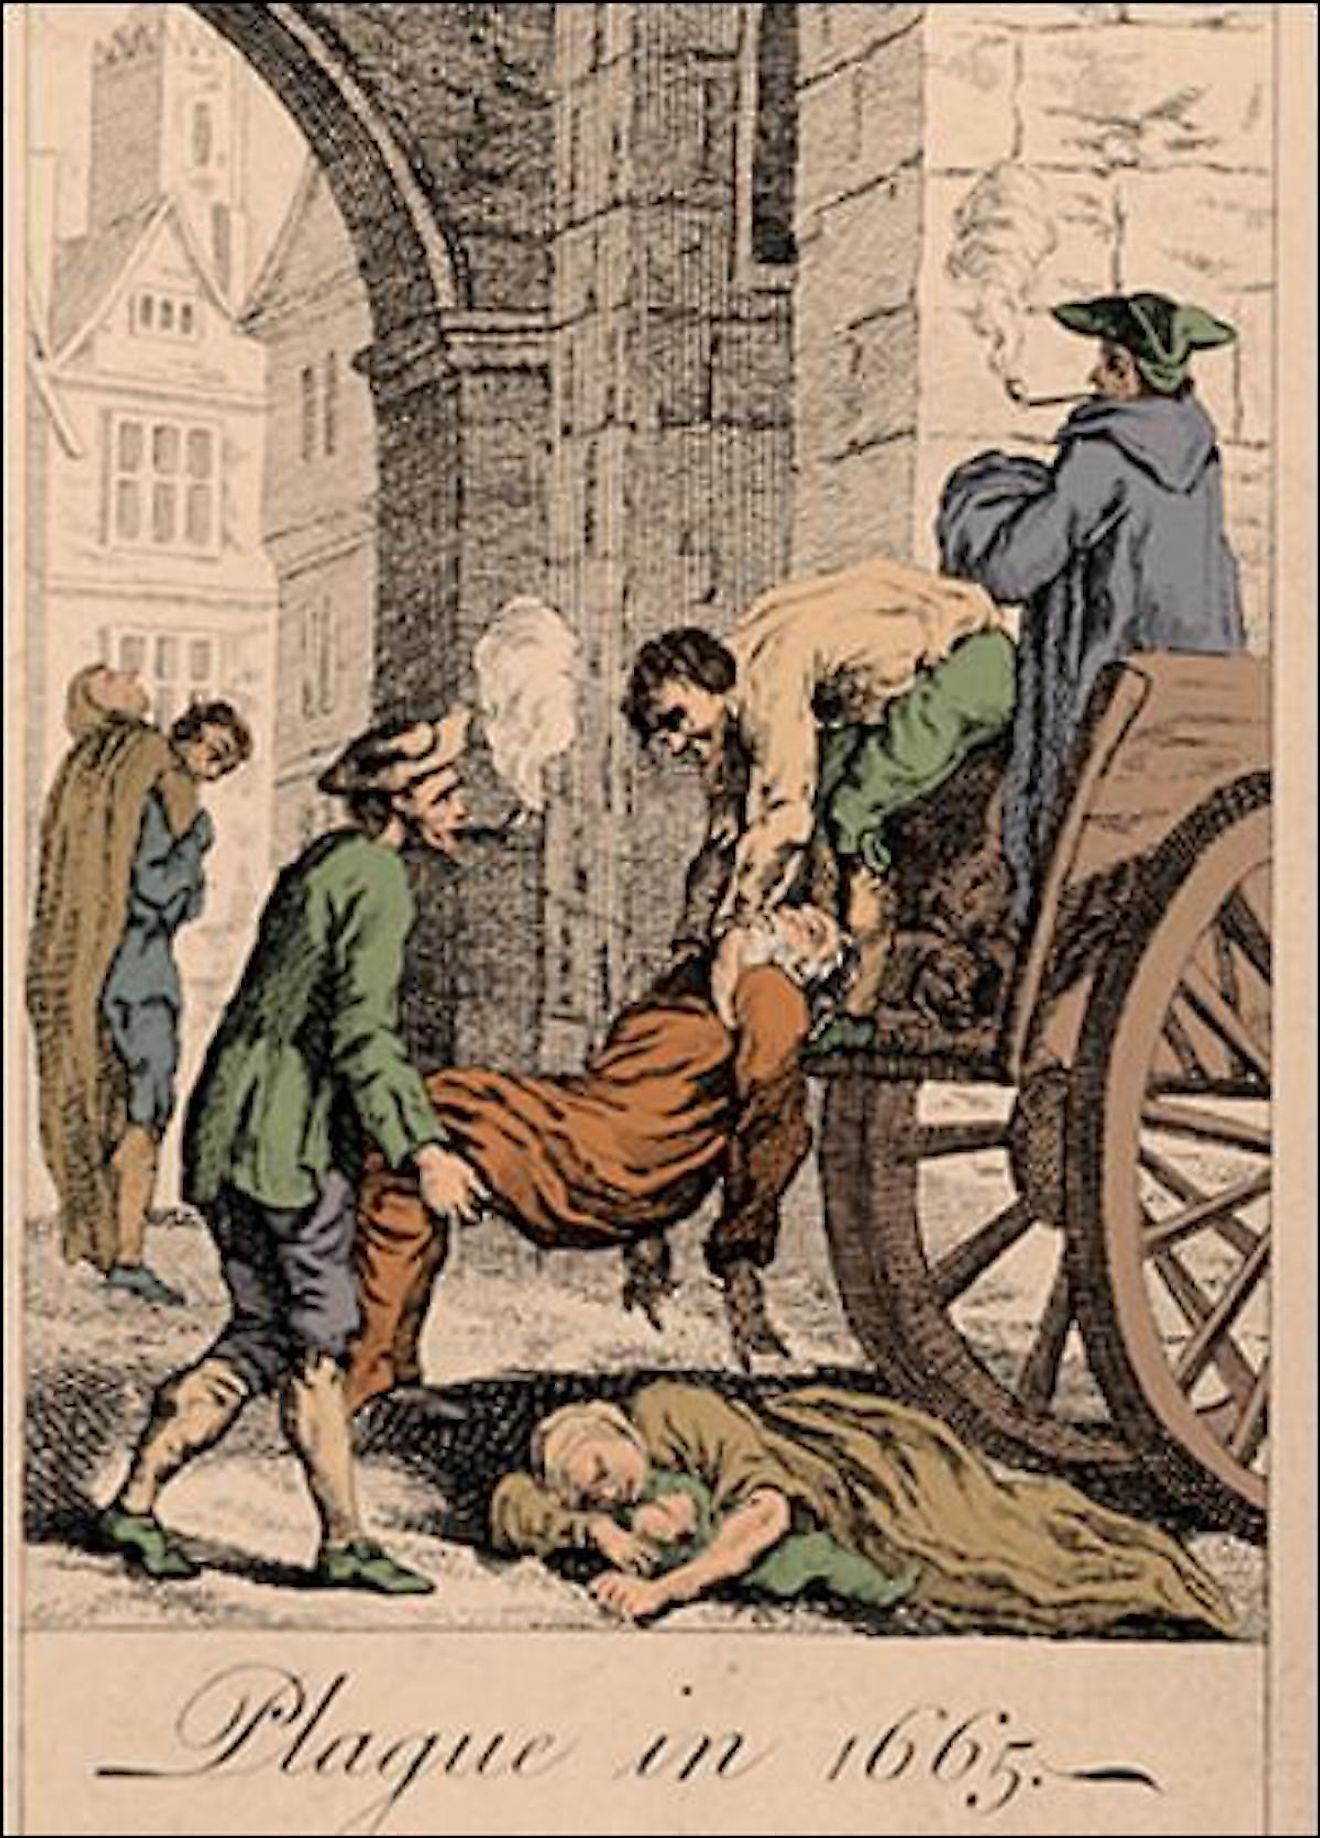 The Great Plague of London in 1665. The last major outbreak of the bubonic plague in England.